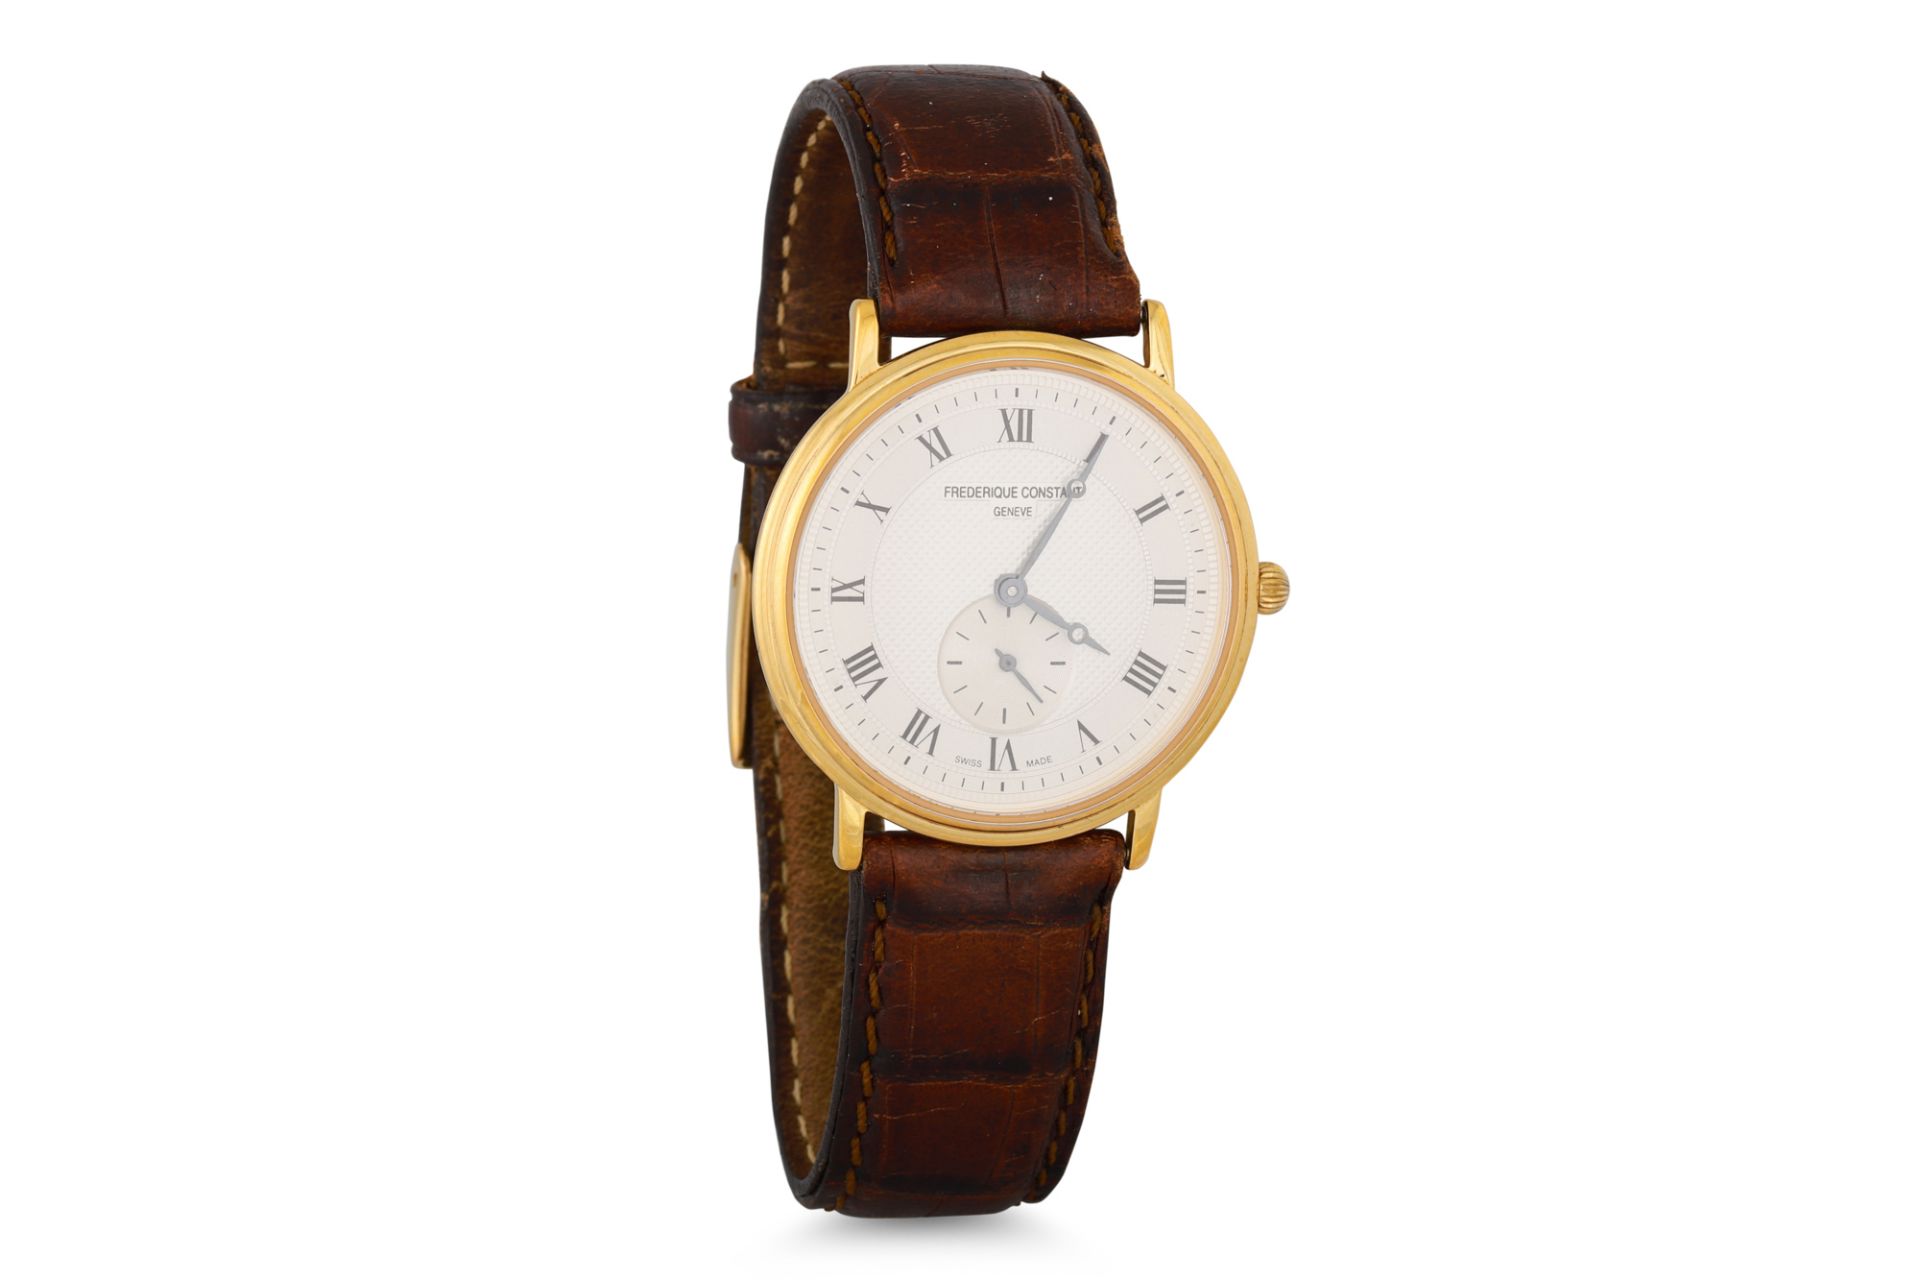 A GENT'S "FREDERIQUE CONSTANT" GOLD PLATED WRISTWATCH, silvered face with Roman numerals, separate